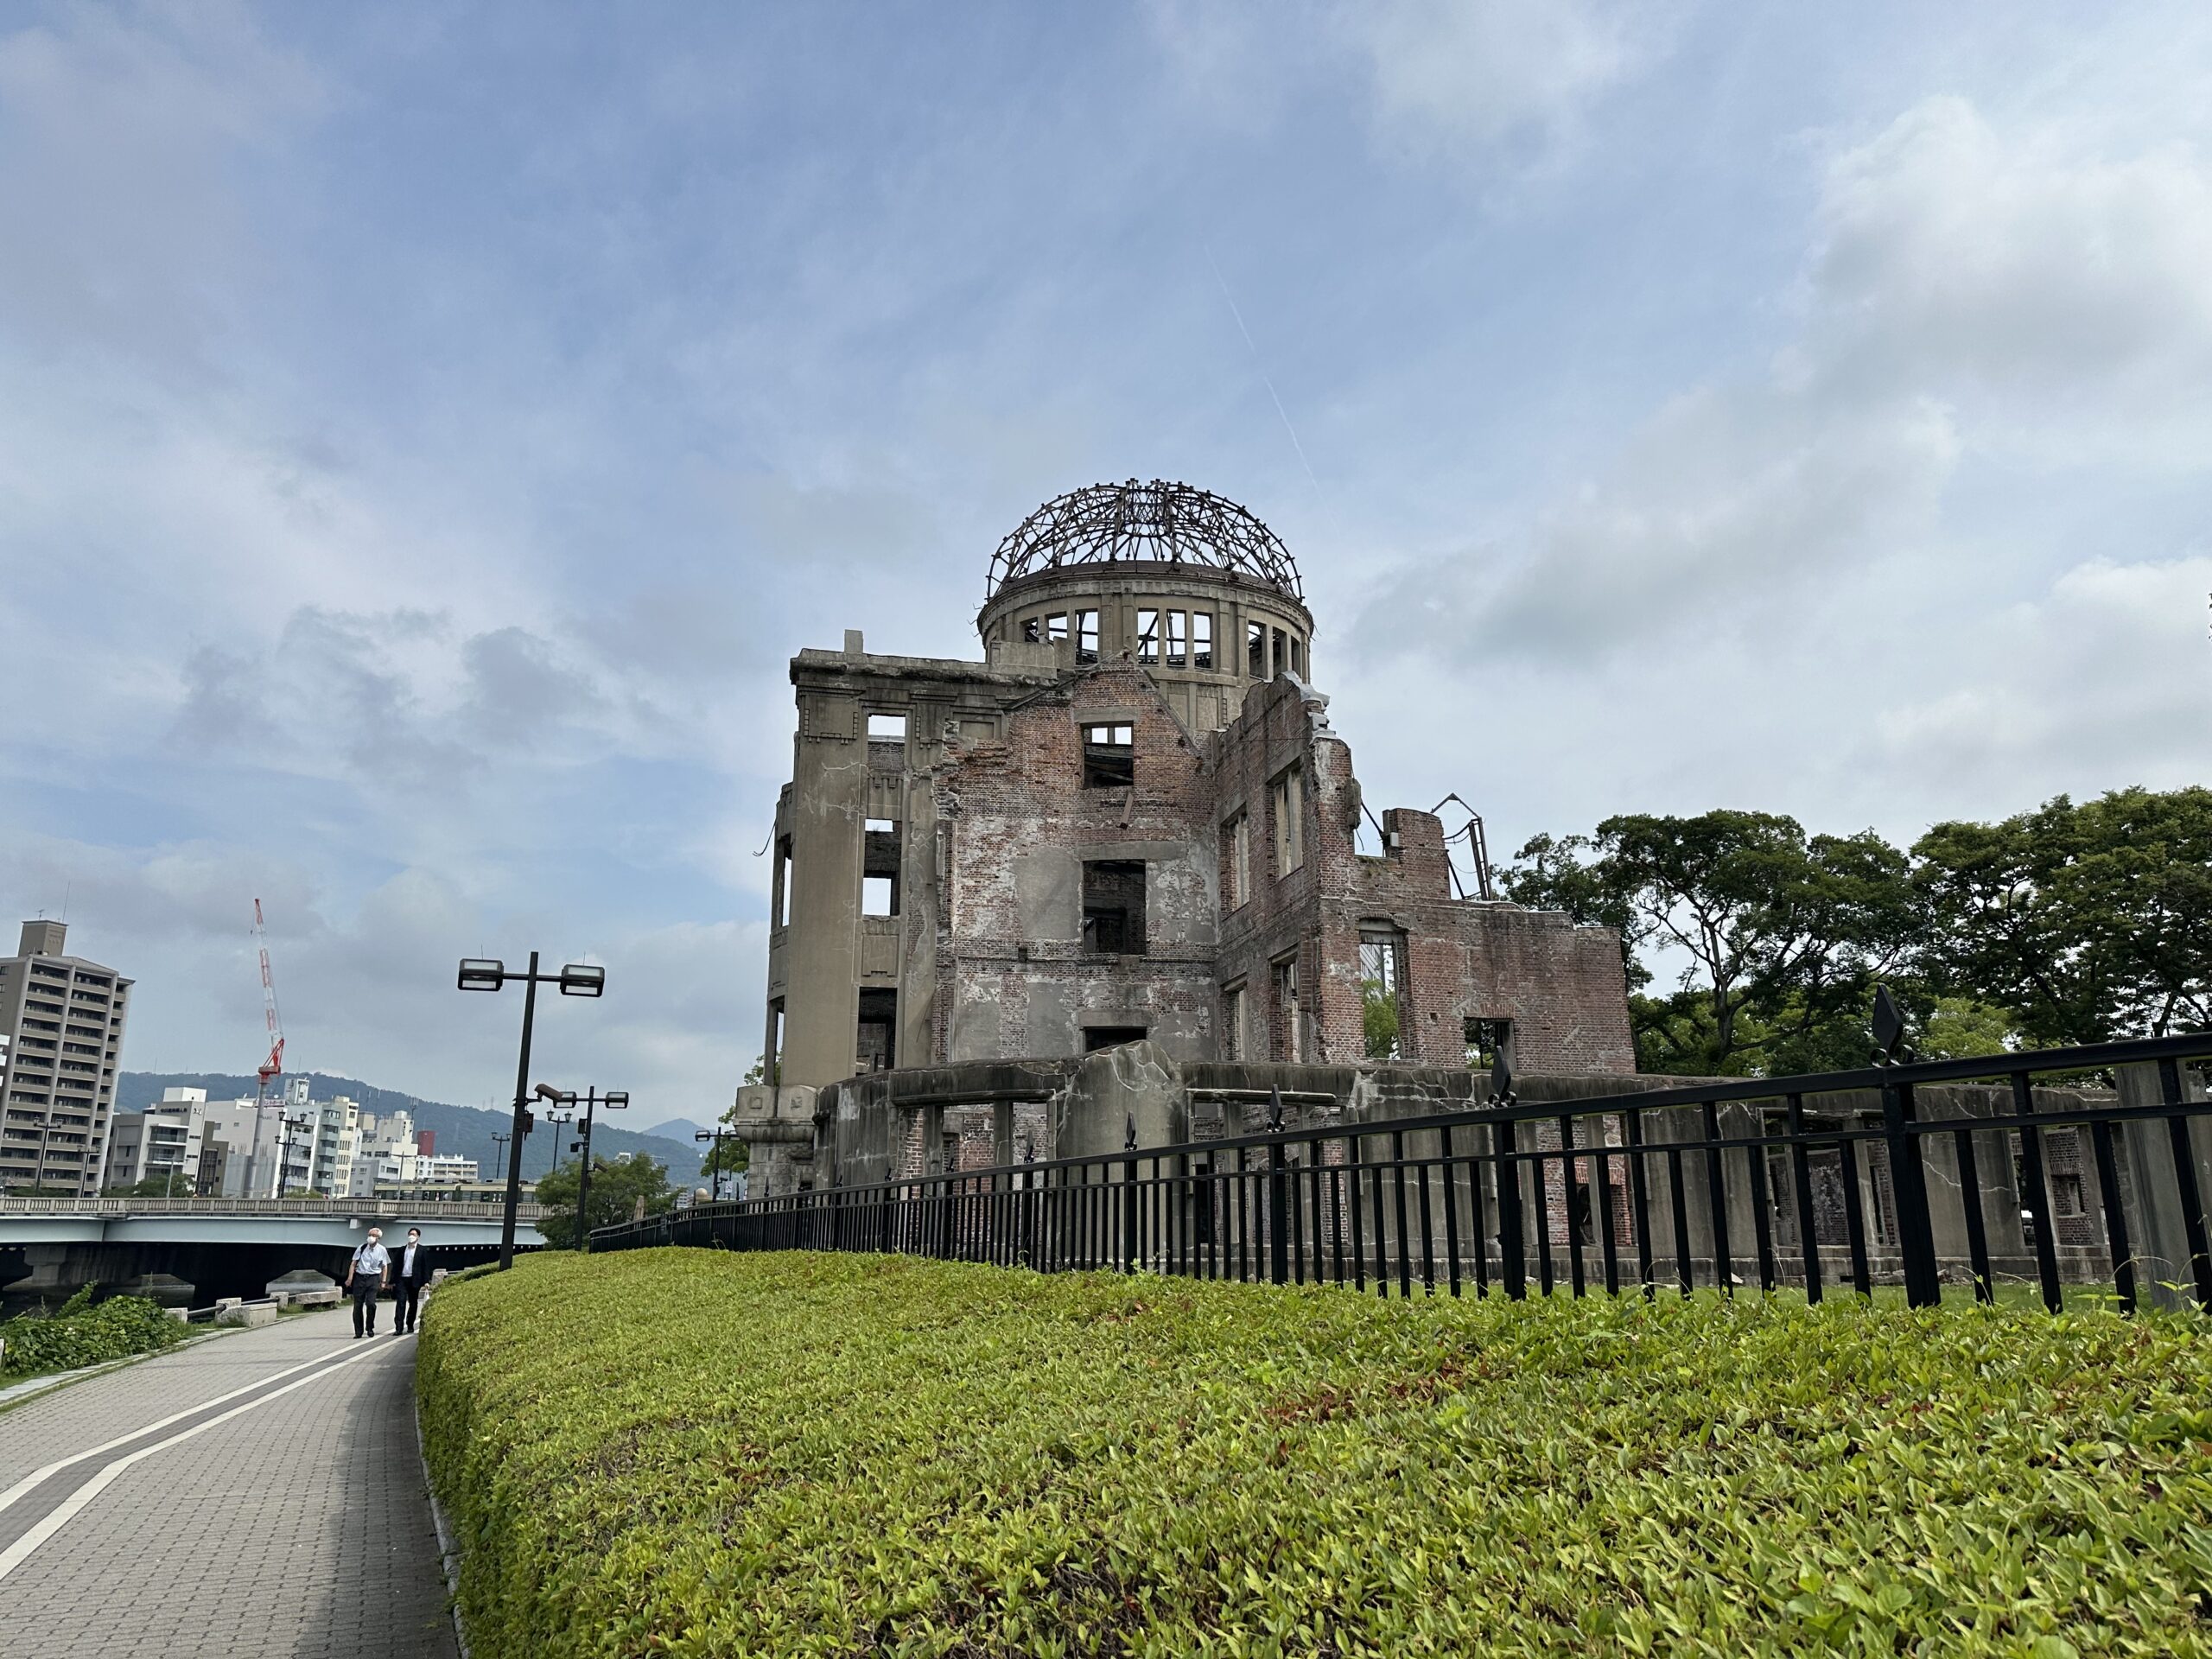 Atomic bomb dome in Hiroshima. This is the only structure left standing near the hypocenter of the atomic bomb after it hit Hiroshima in August 1945.